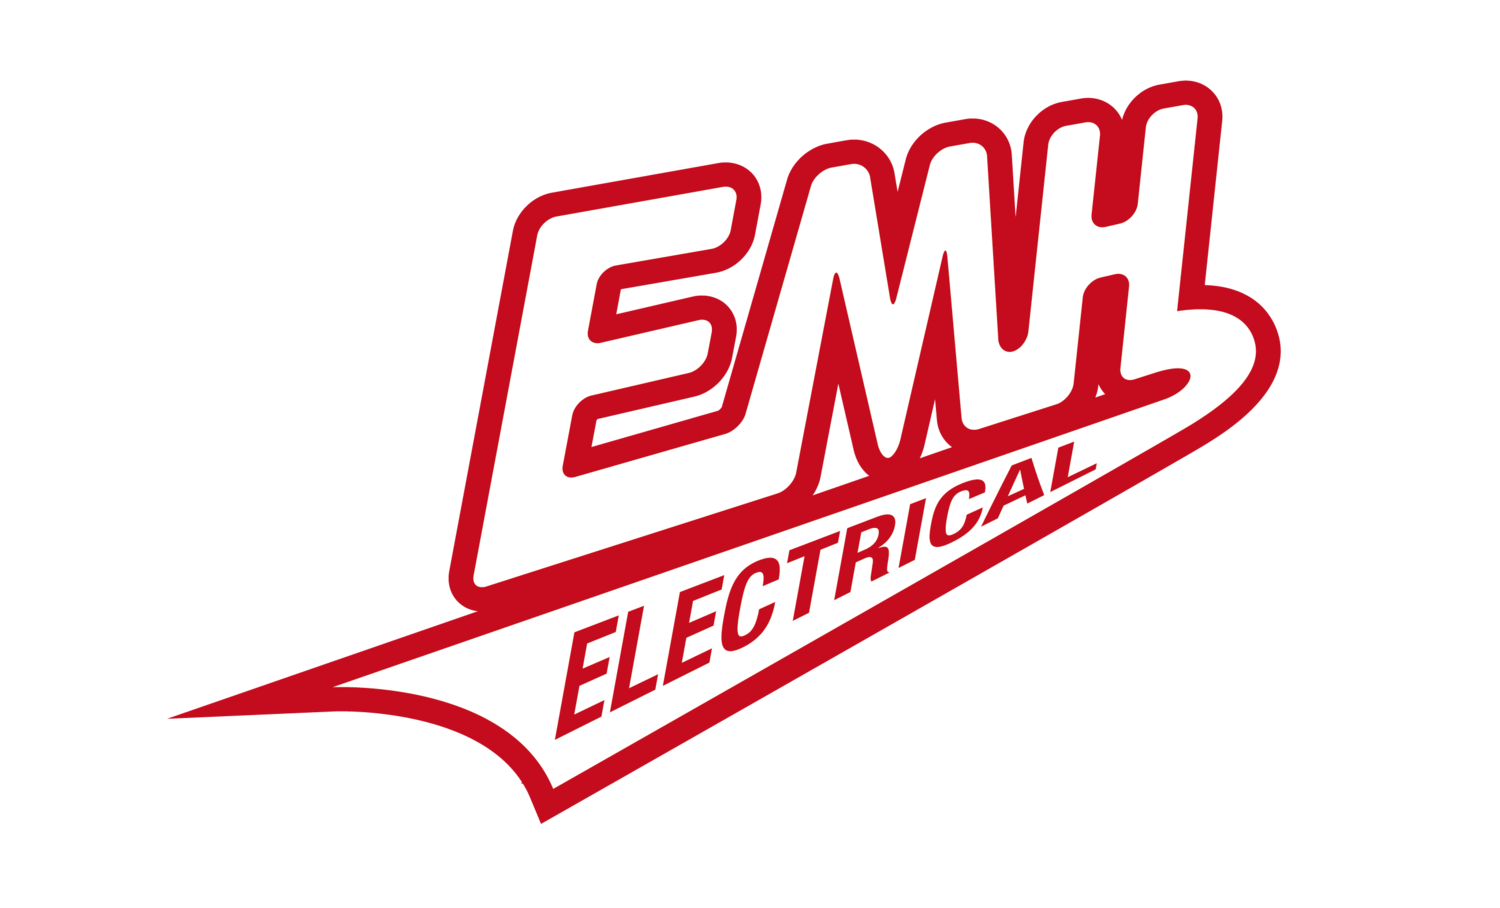 EMH ELECTRICAL 